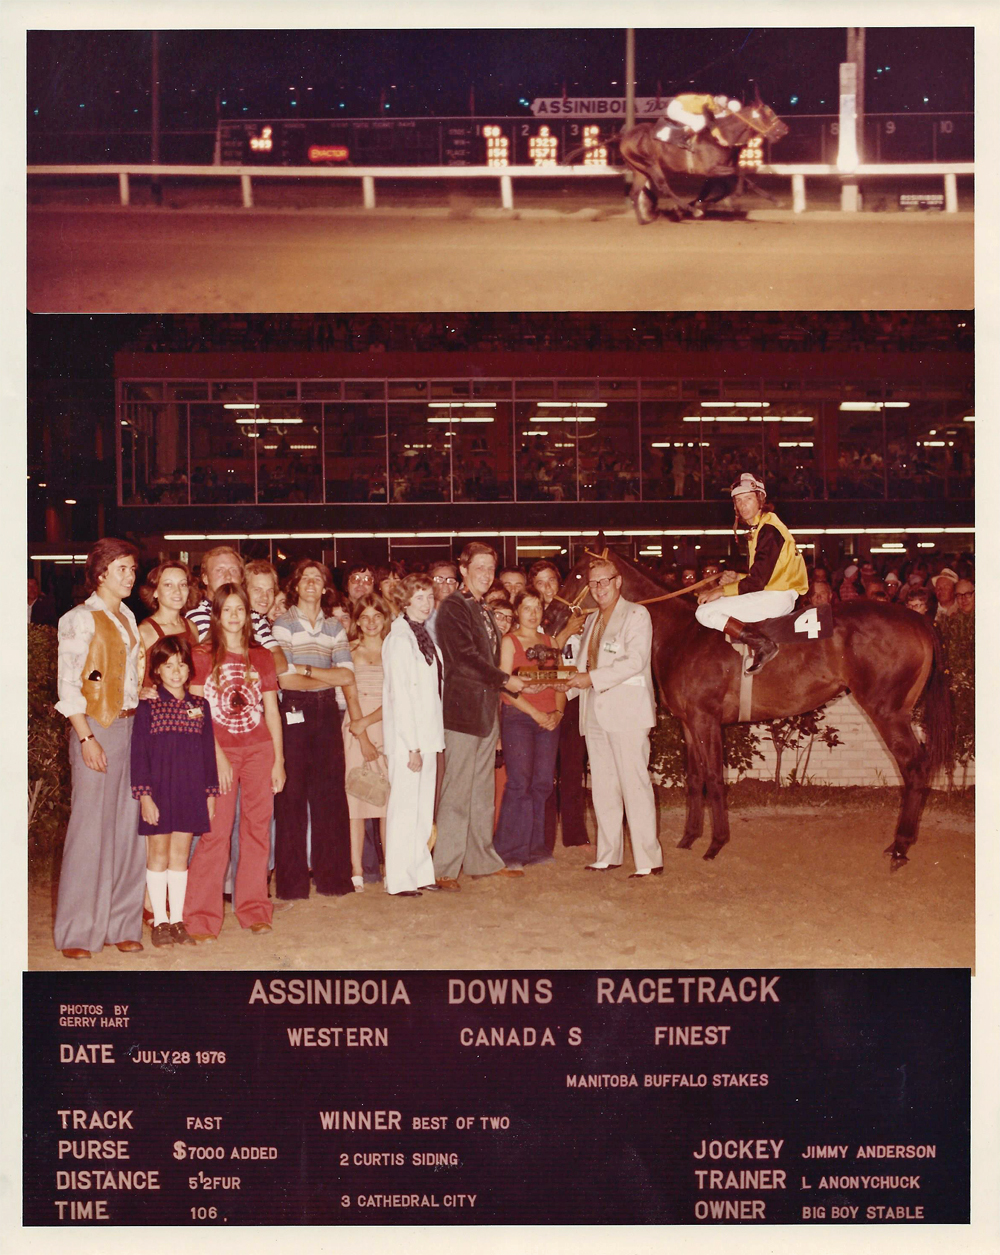 Best of Two wins 1976 Buffalo Stakes at Assiniboia Downs.